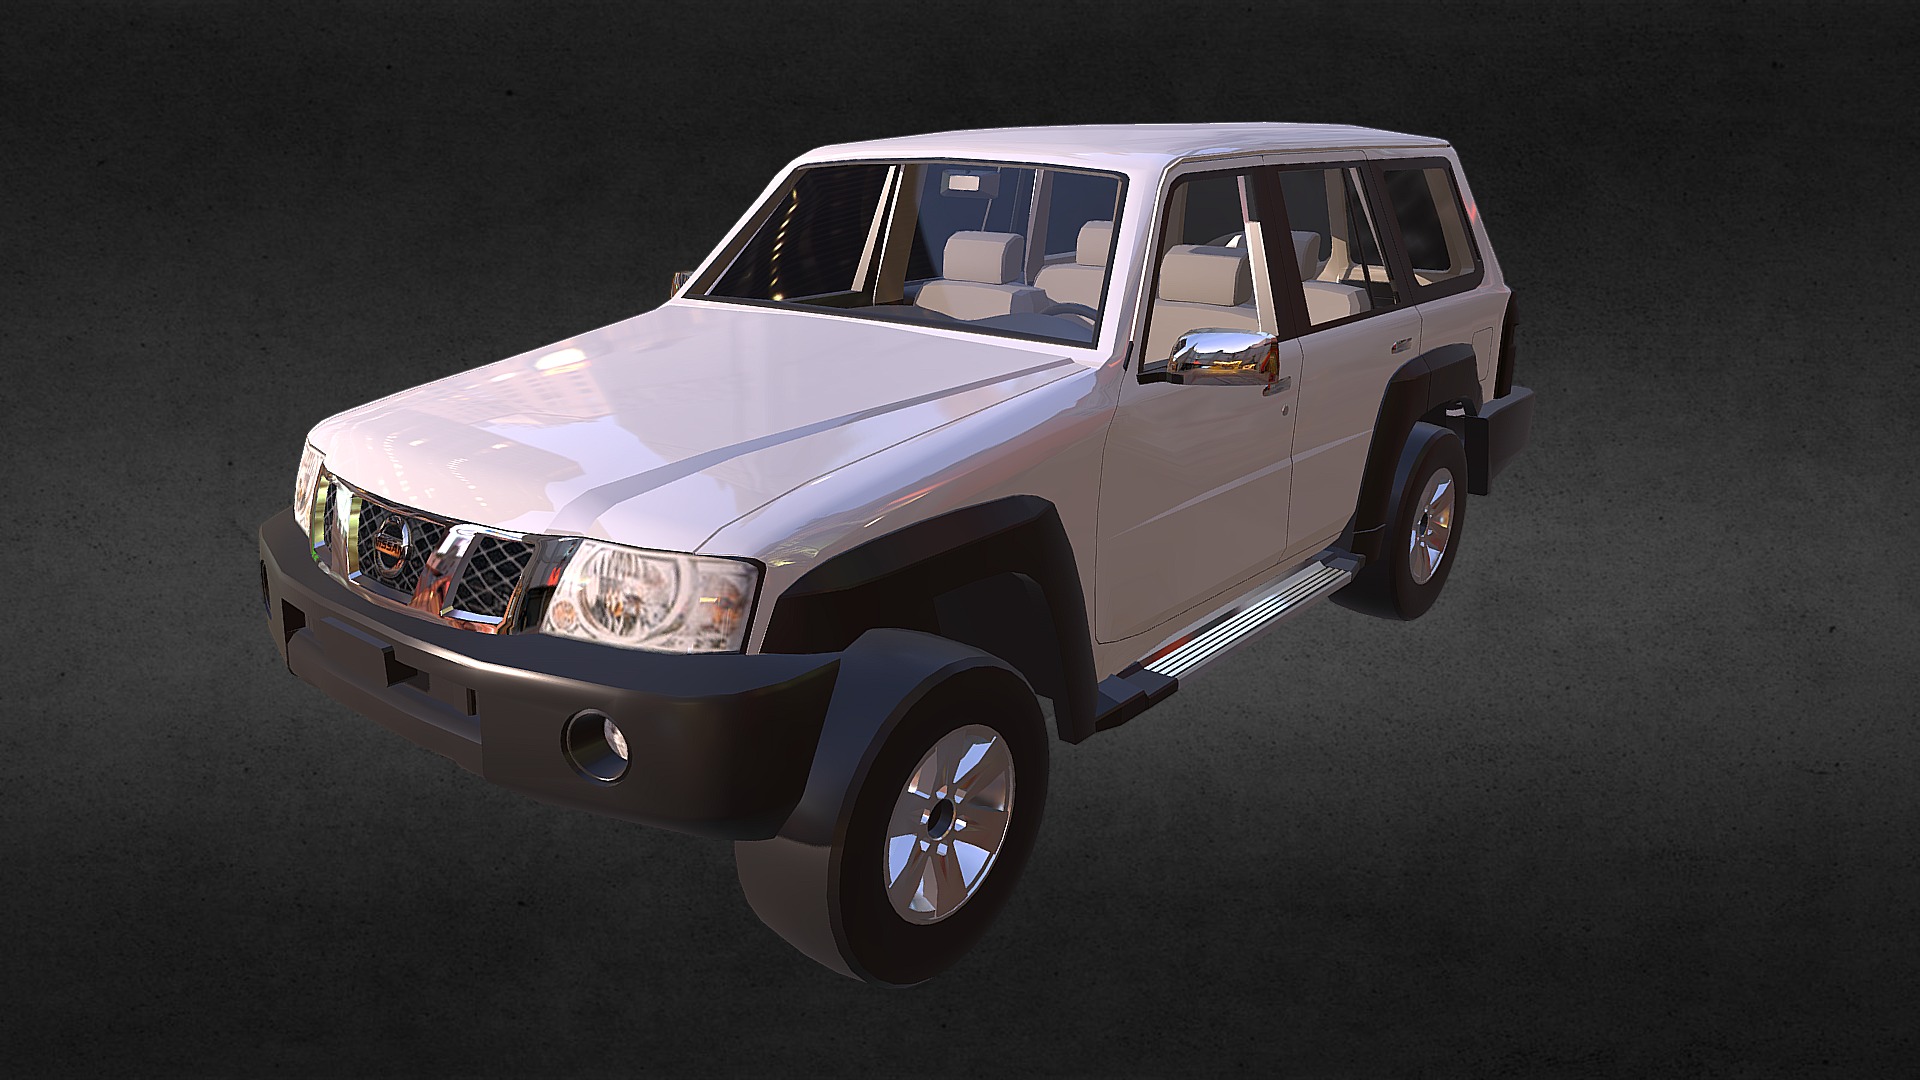 3D model 2016 Nissan Patrol - This is a 3D model of the 2016 Nissan Patrol. The 3D model is about a white car with a blue stripe.